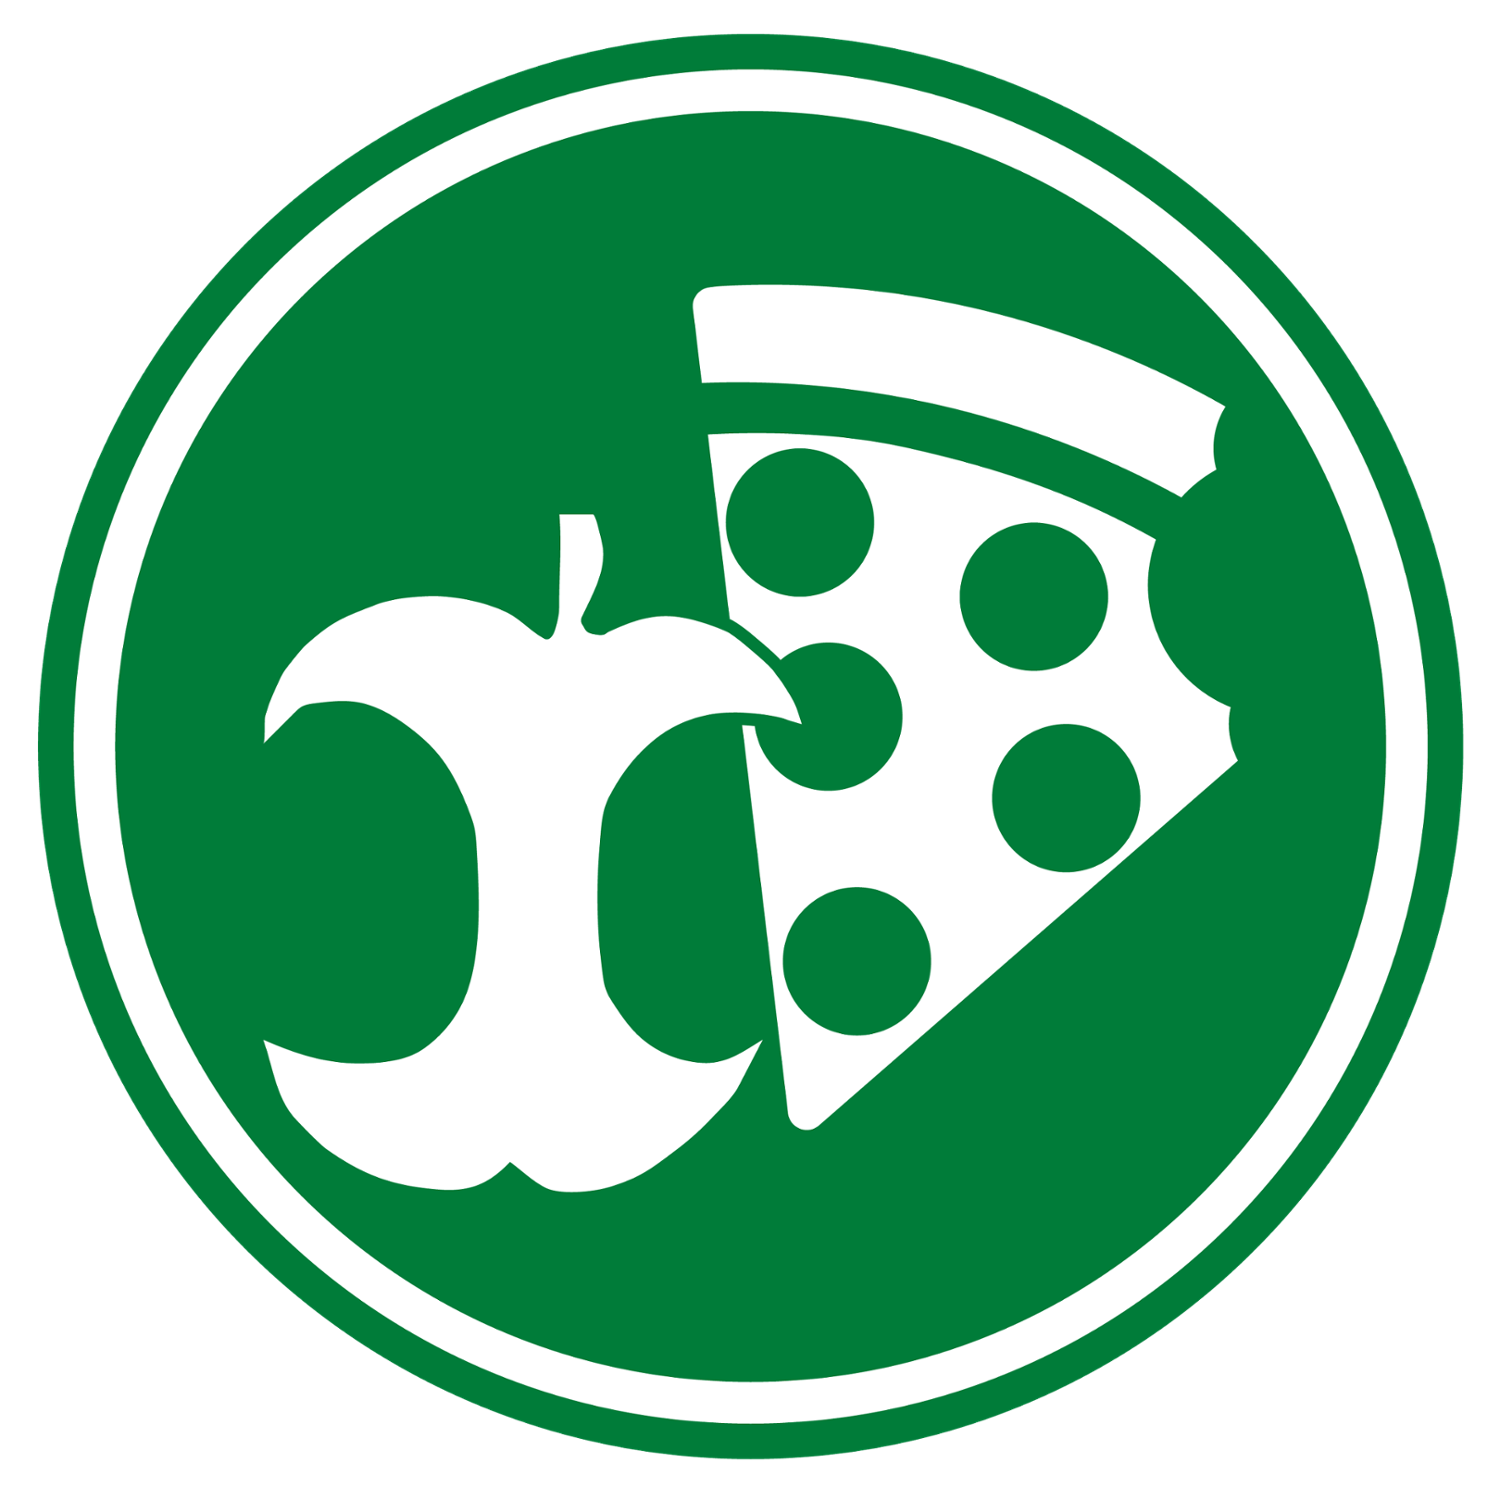 waste-icon-compost-circle.png